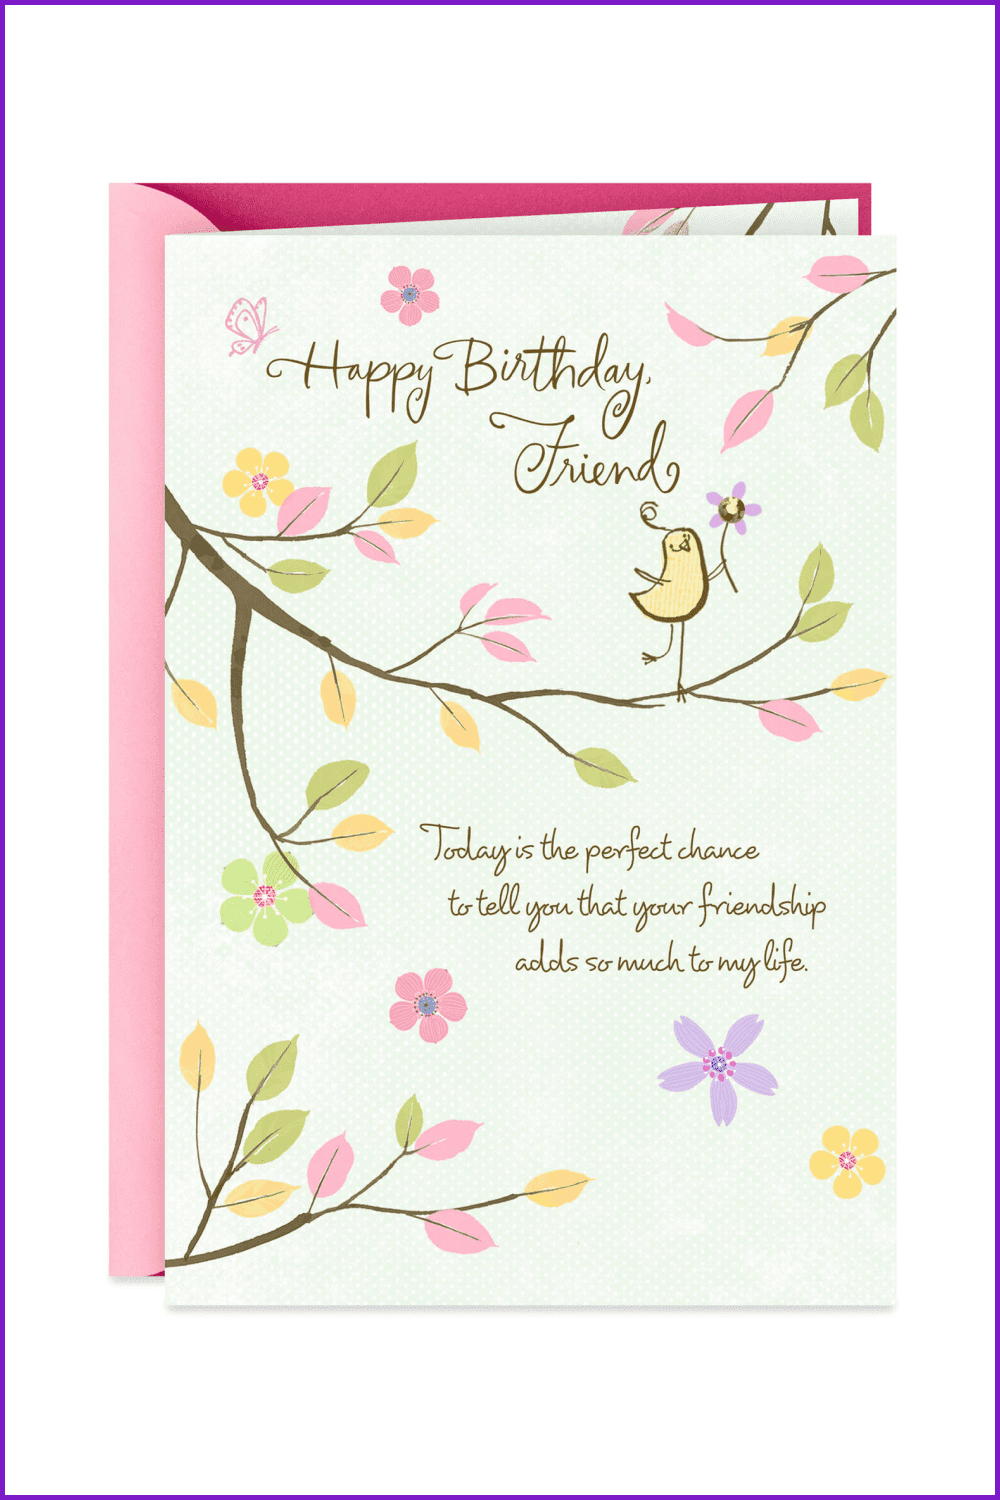 Beige card with flowers and a singing bird on a branch.